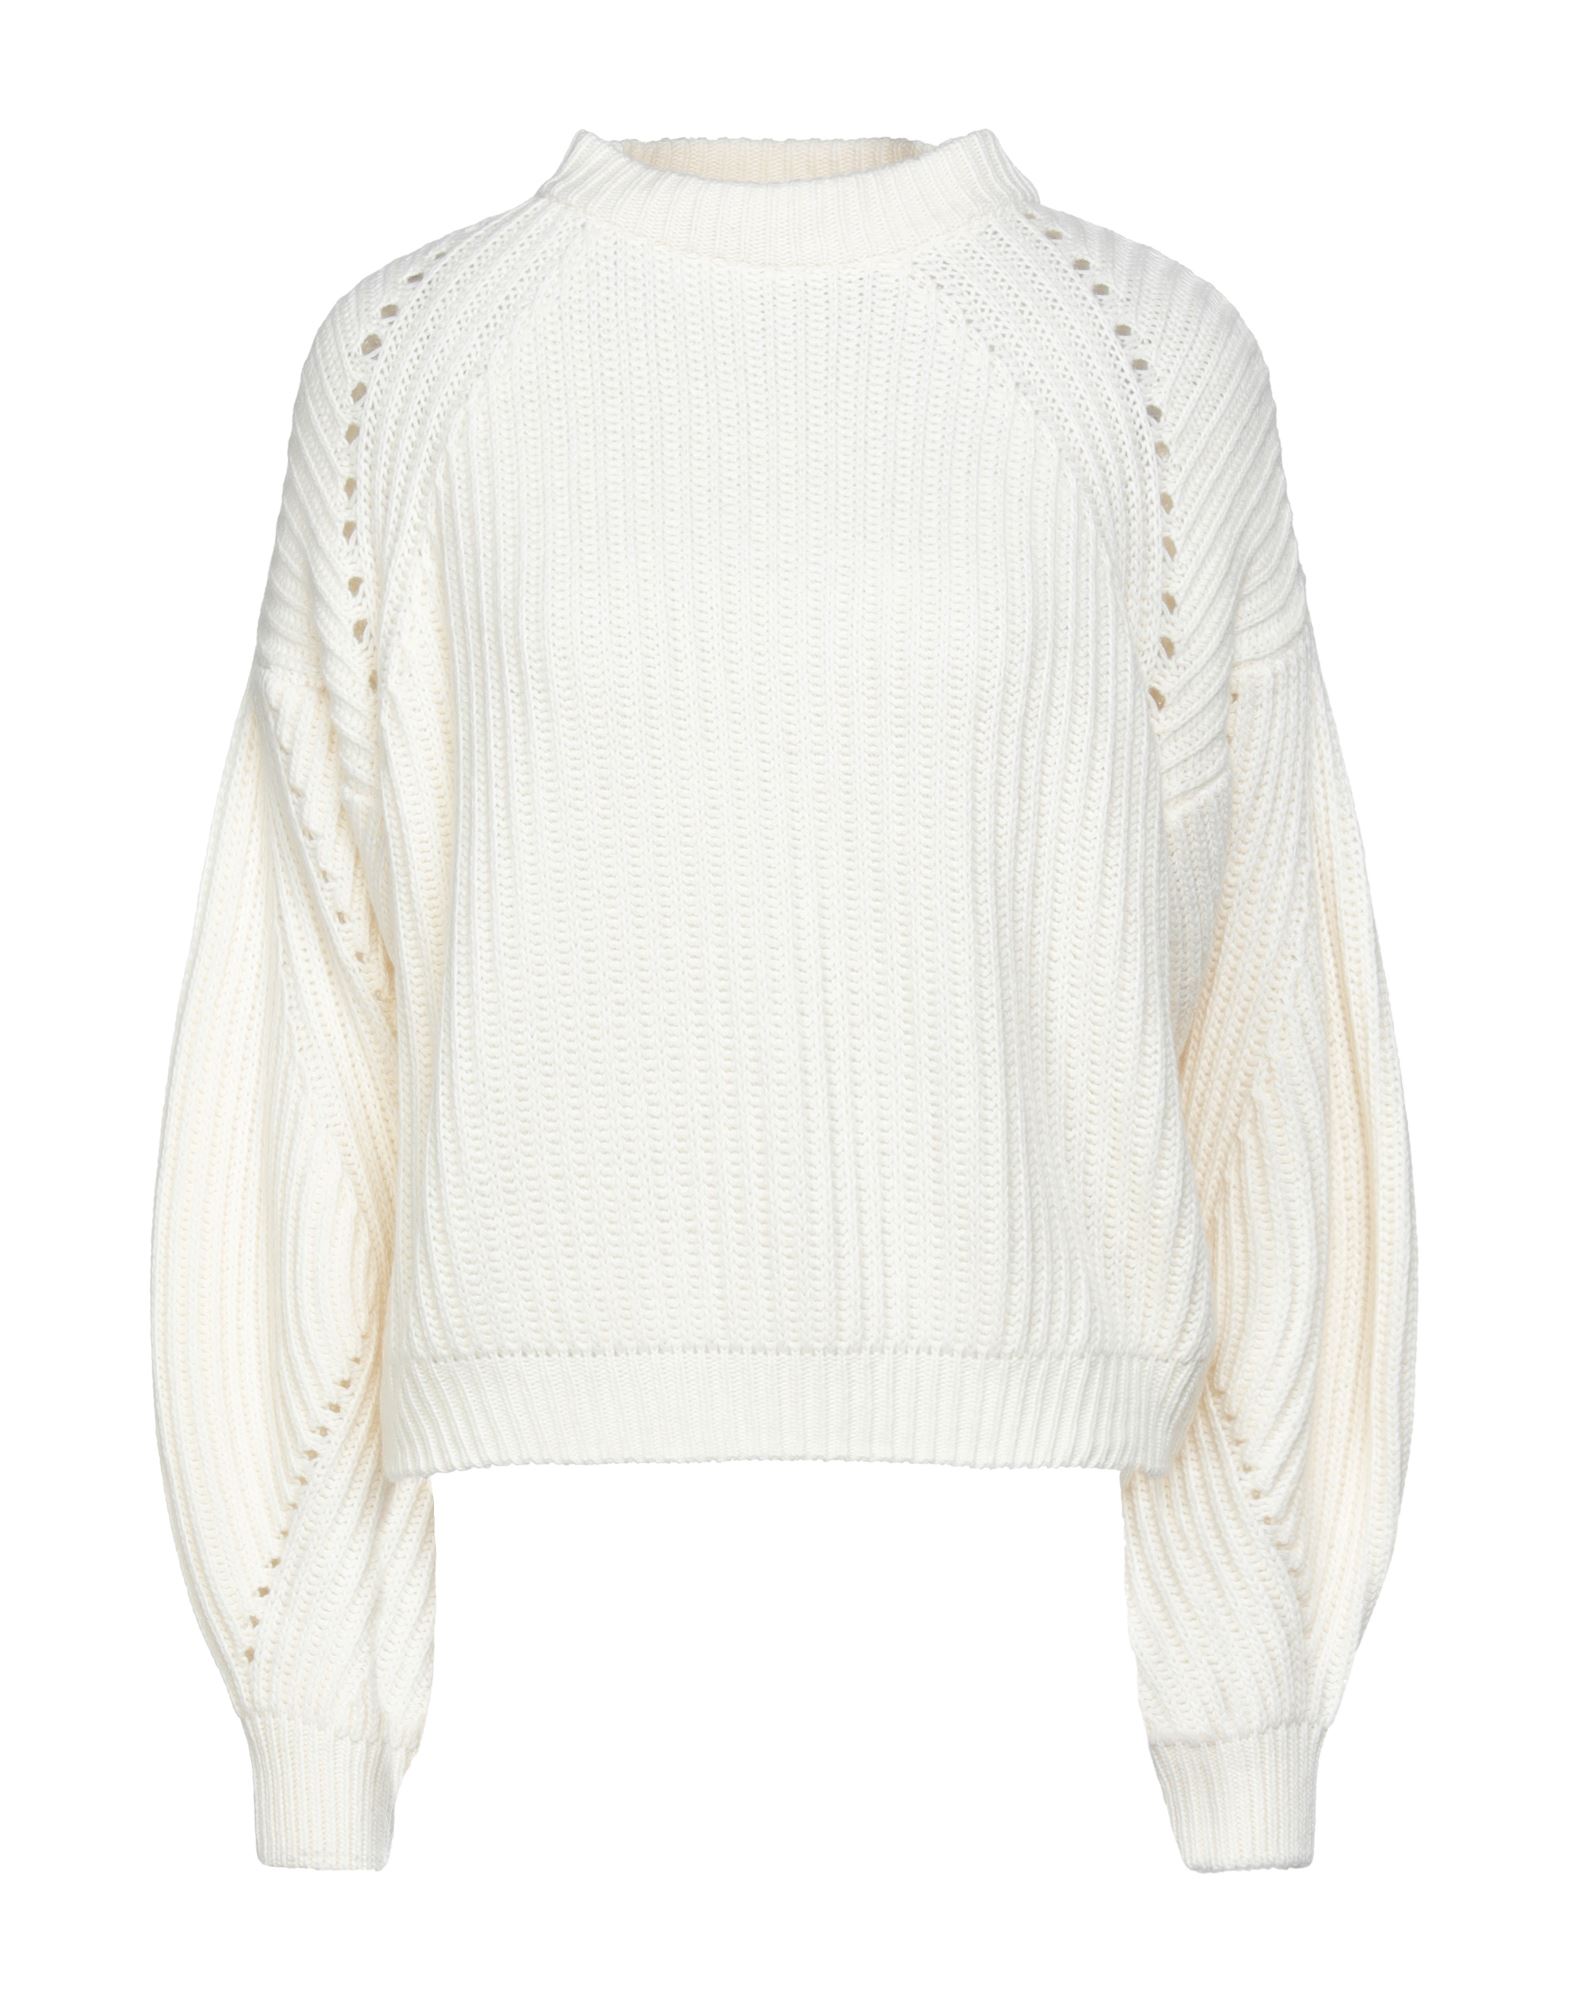 N.o.w. Andrea Rosati Cashmere Sweaters In Ivory